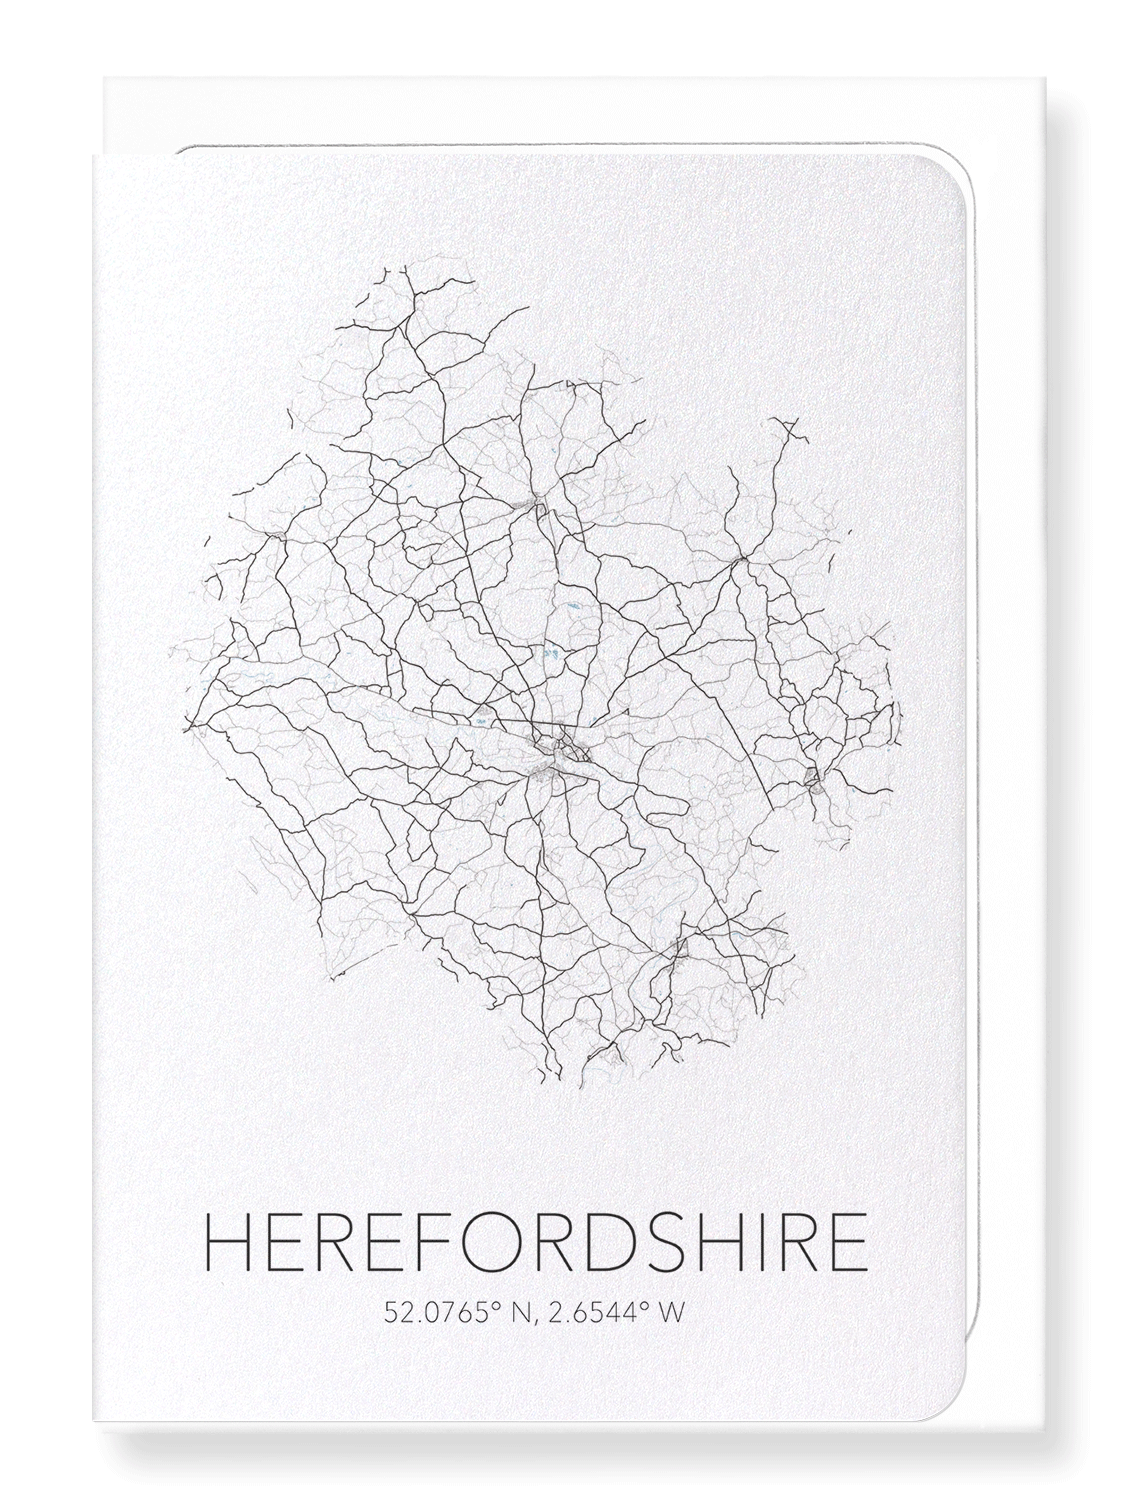 HEREFORDSHIRE CUTOUT